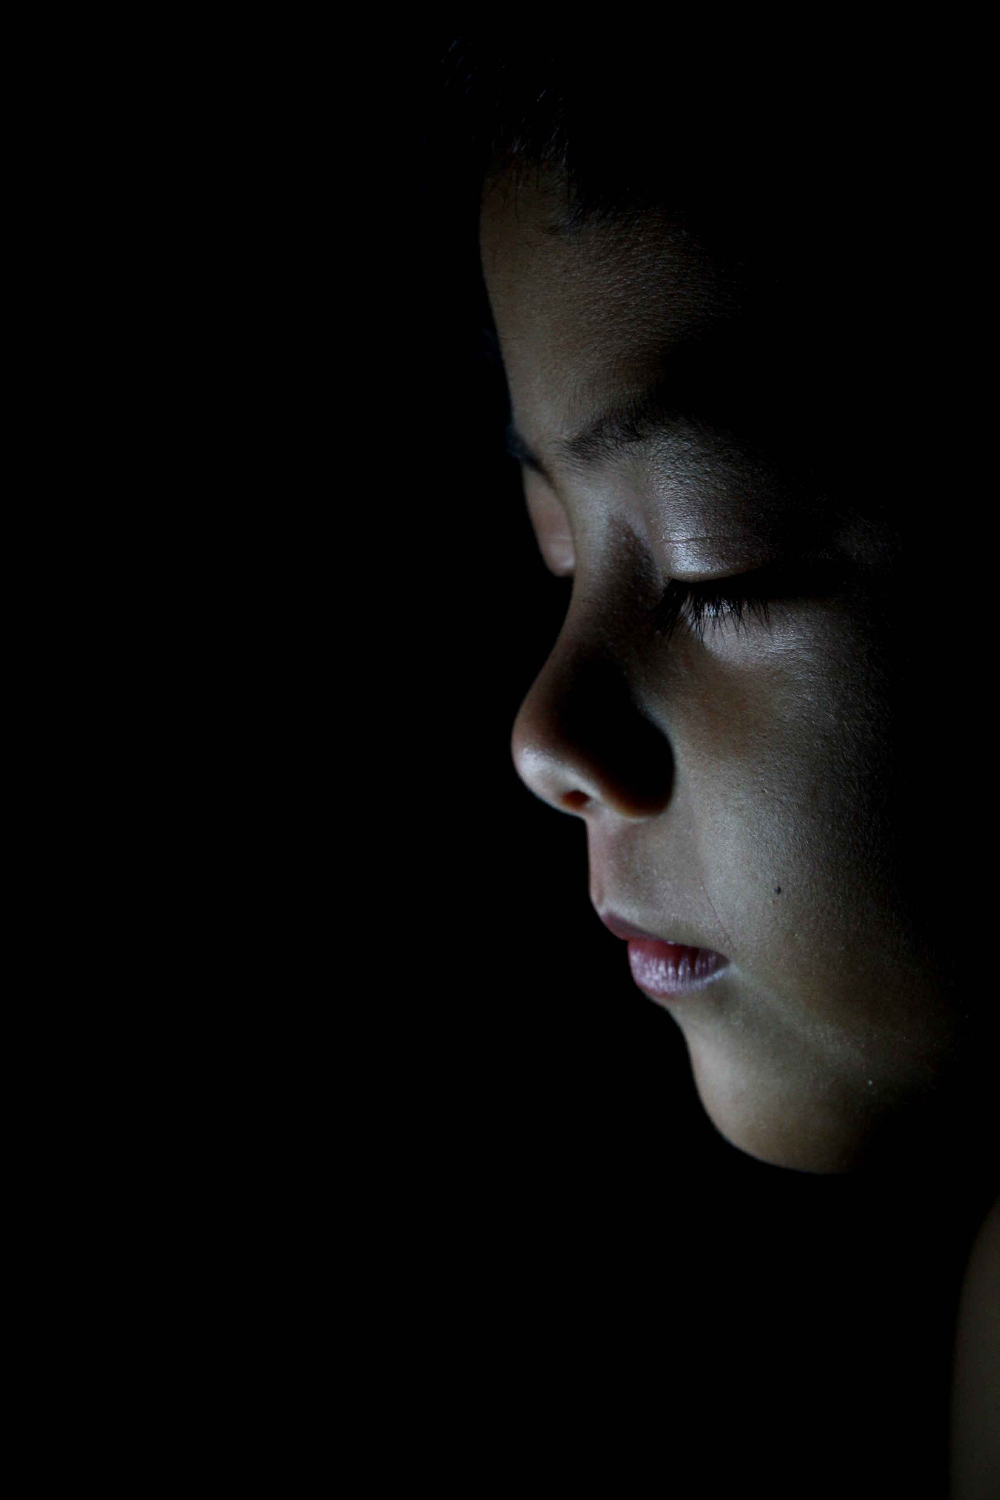 More Children are Having Suicidal Thoughts, Research Shows